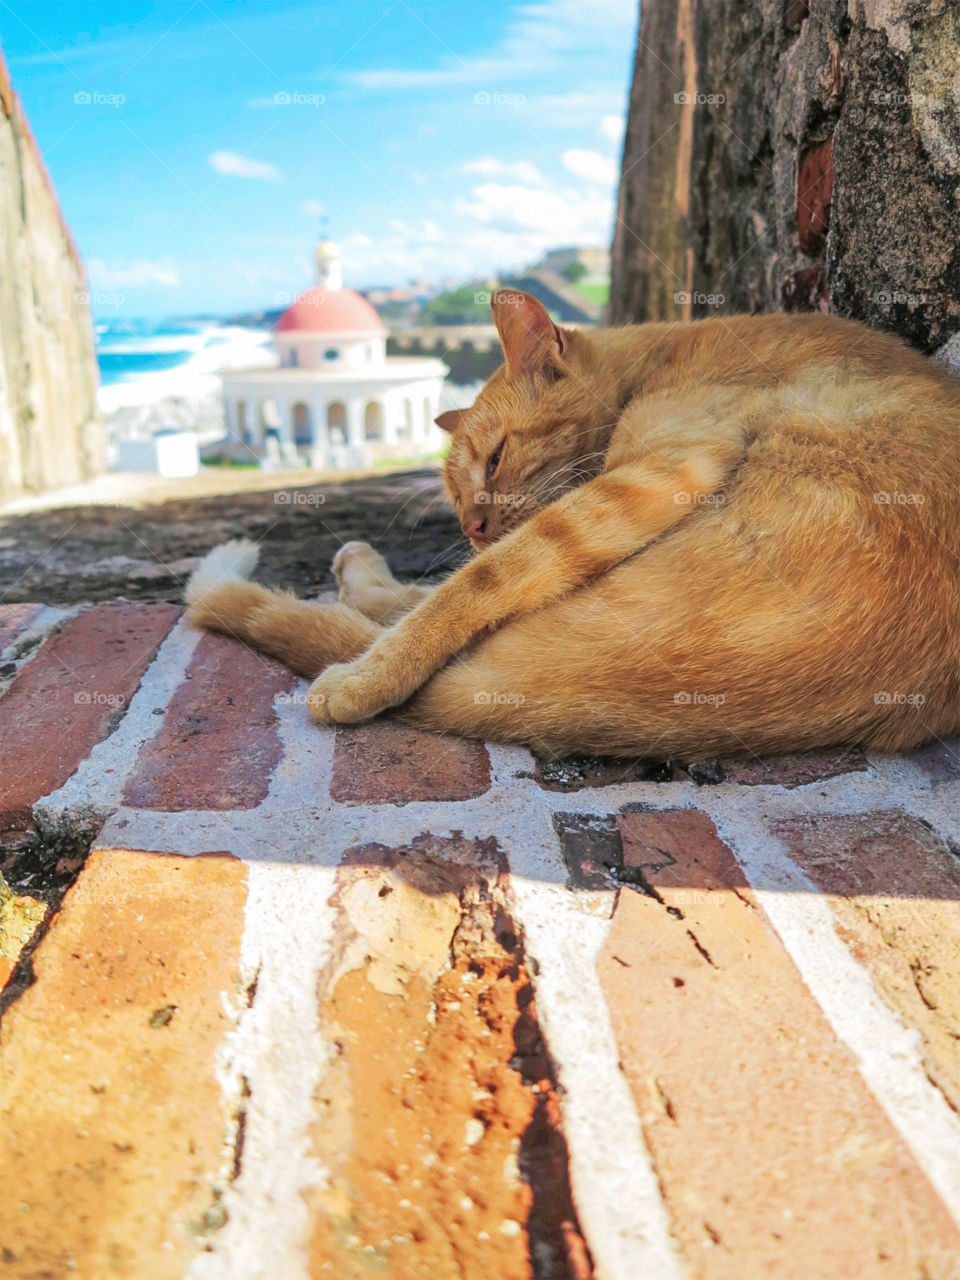 Cute orange cat lying on a red brick wall, with the castle of El Morro in the background. San Juan, Puerto Rico.